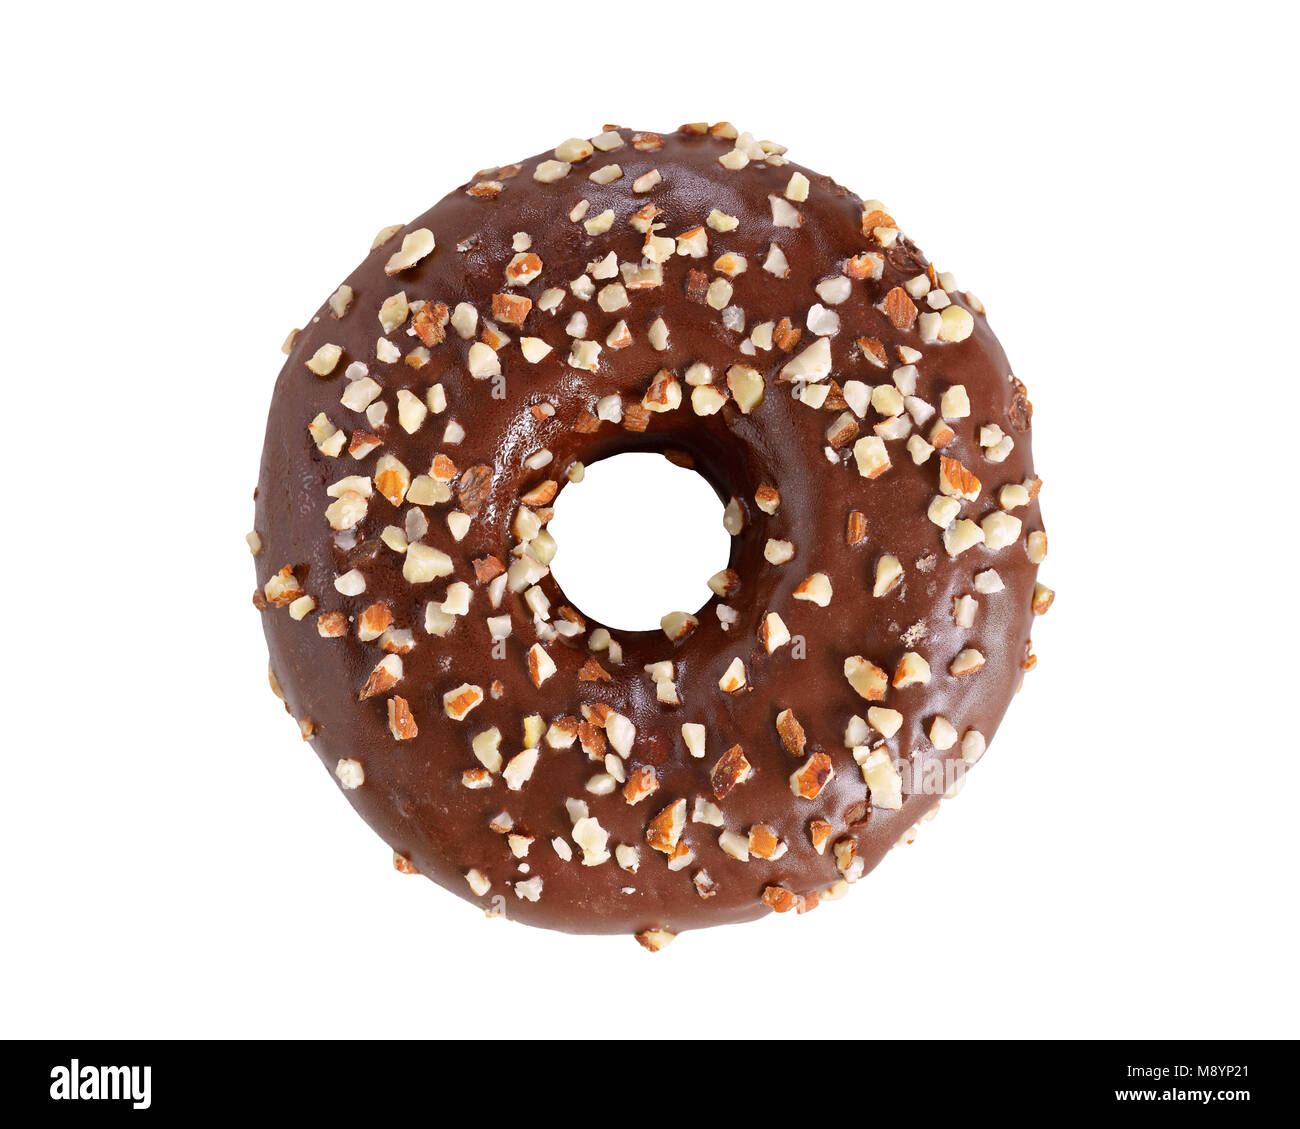 Doughnut Covered with Chocolate and Nuts, Cut Out Stock Photo